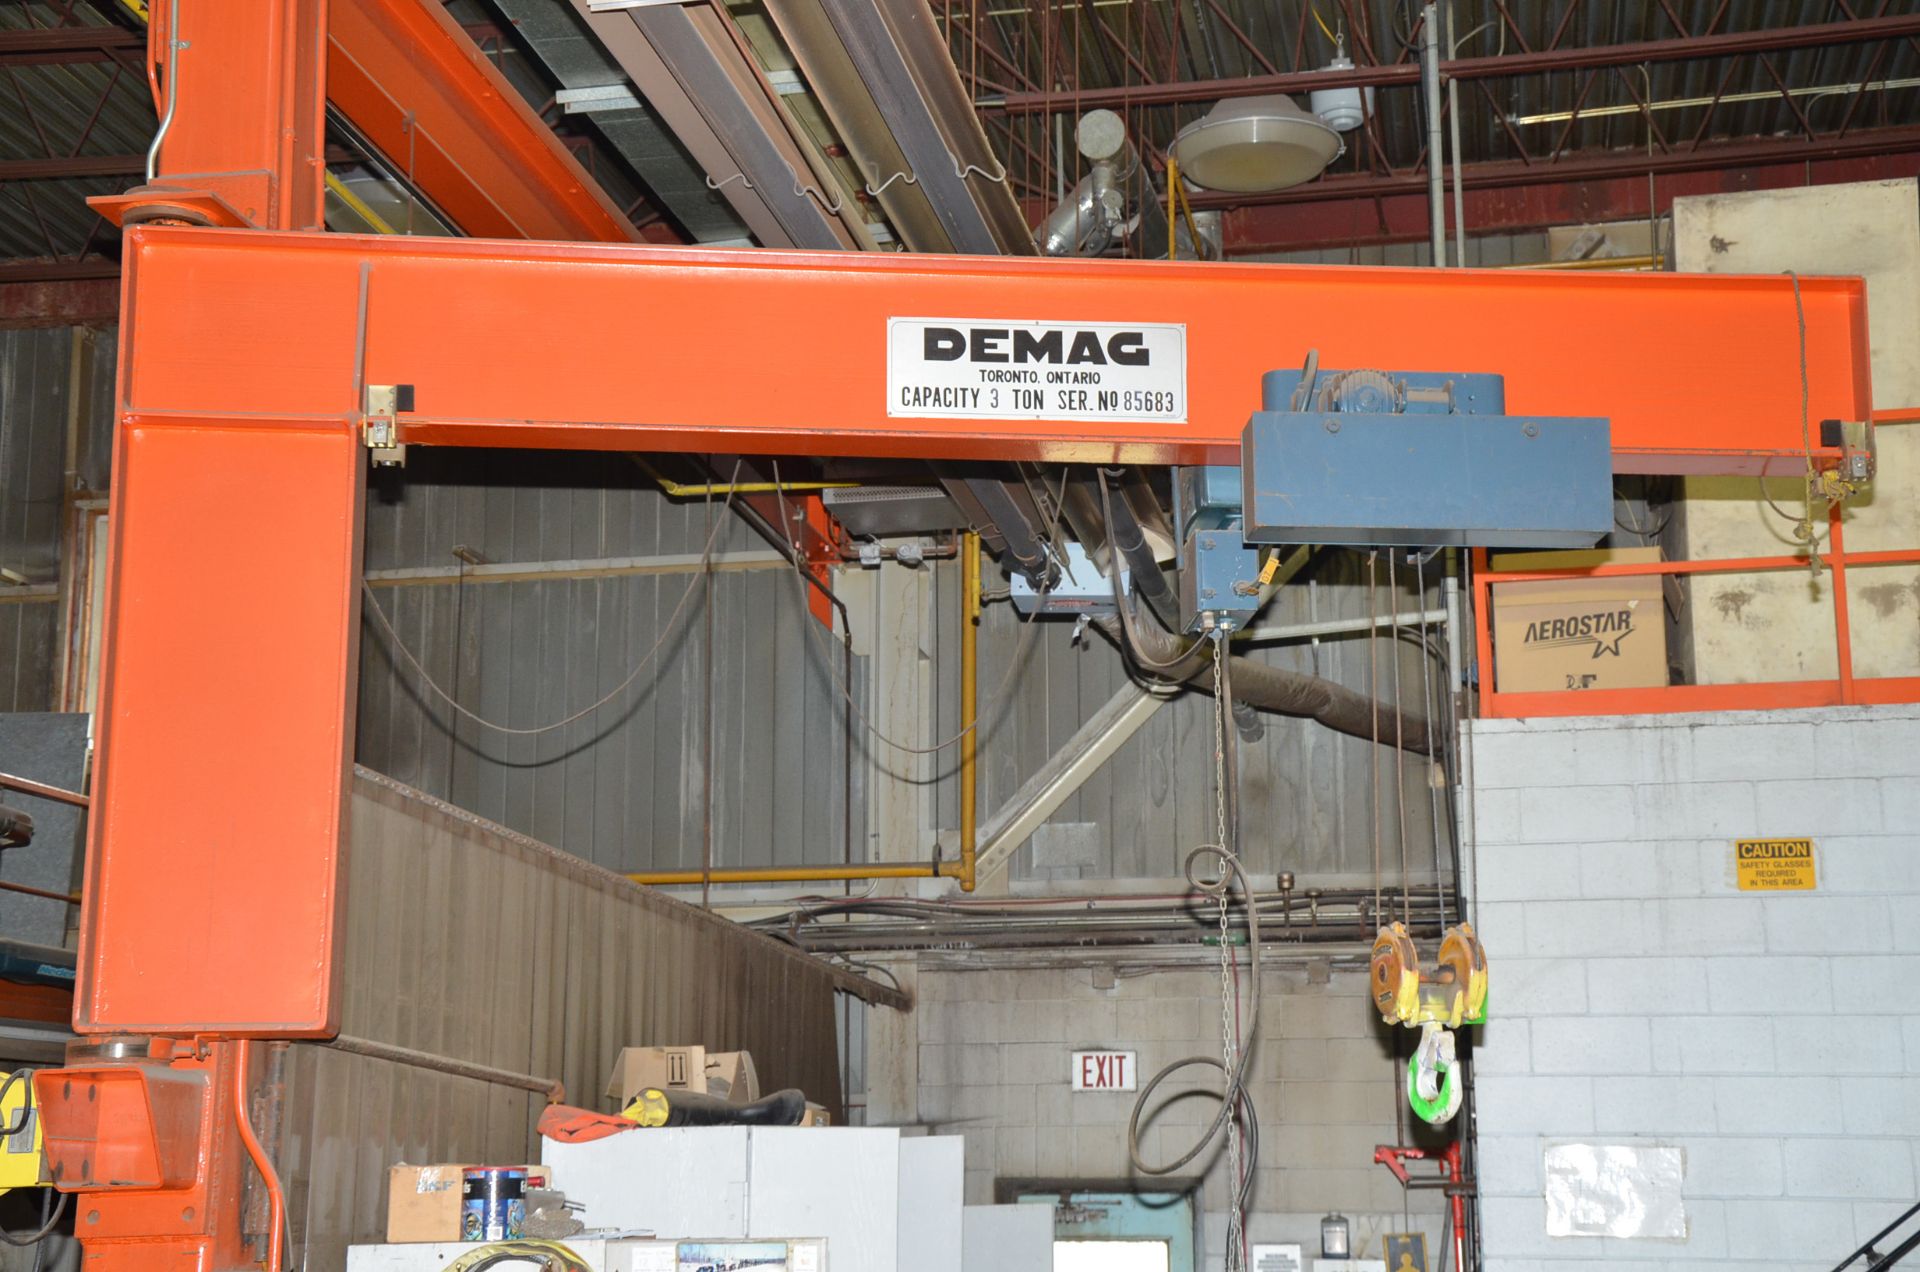 DEMAG 3TON COLUMN MOUNTED JIB ARM WITH 13' SPAN AND 12' HEIGHT UNDER THE HOOK, S/N: 85683 [RIGGING - Image 2 of 2